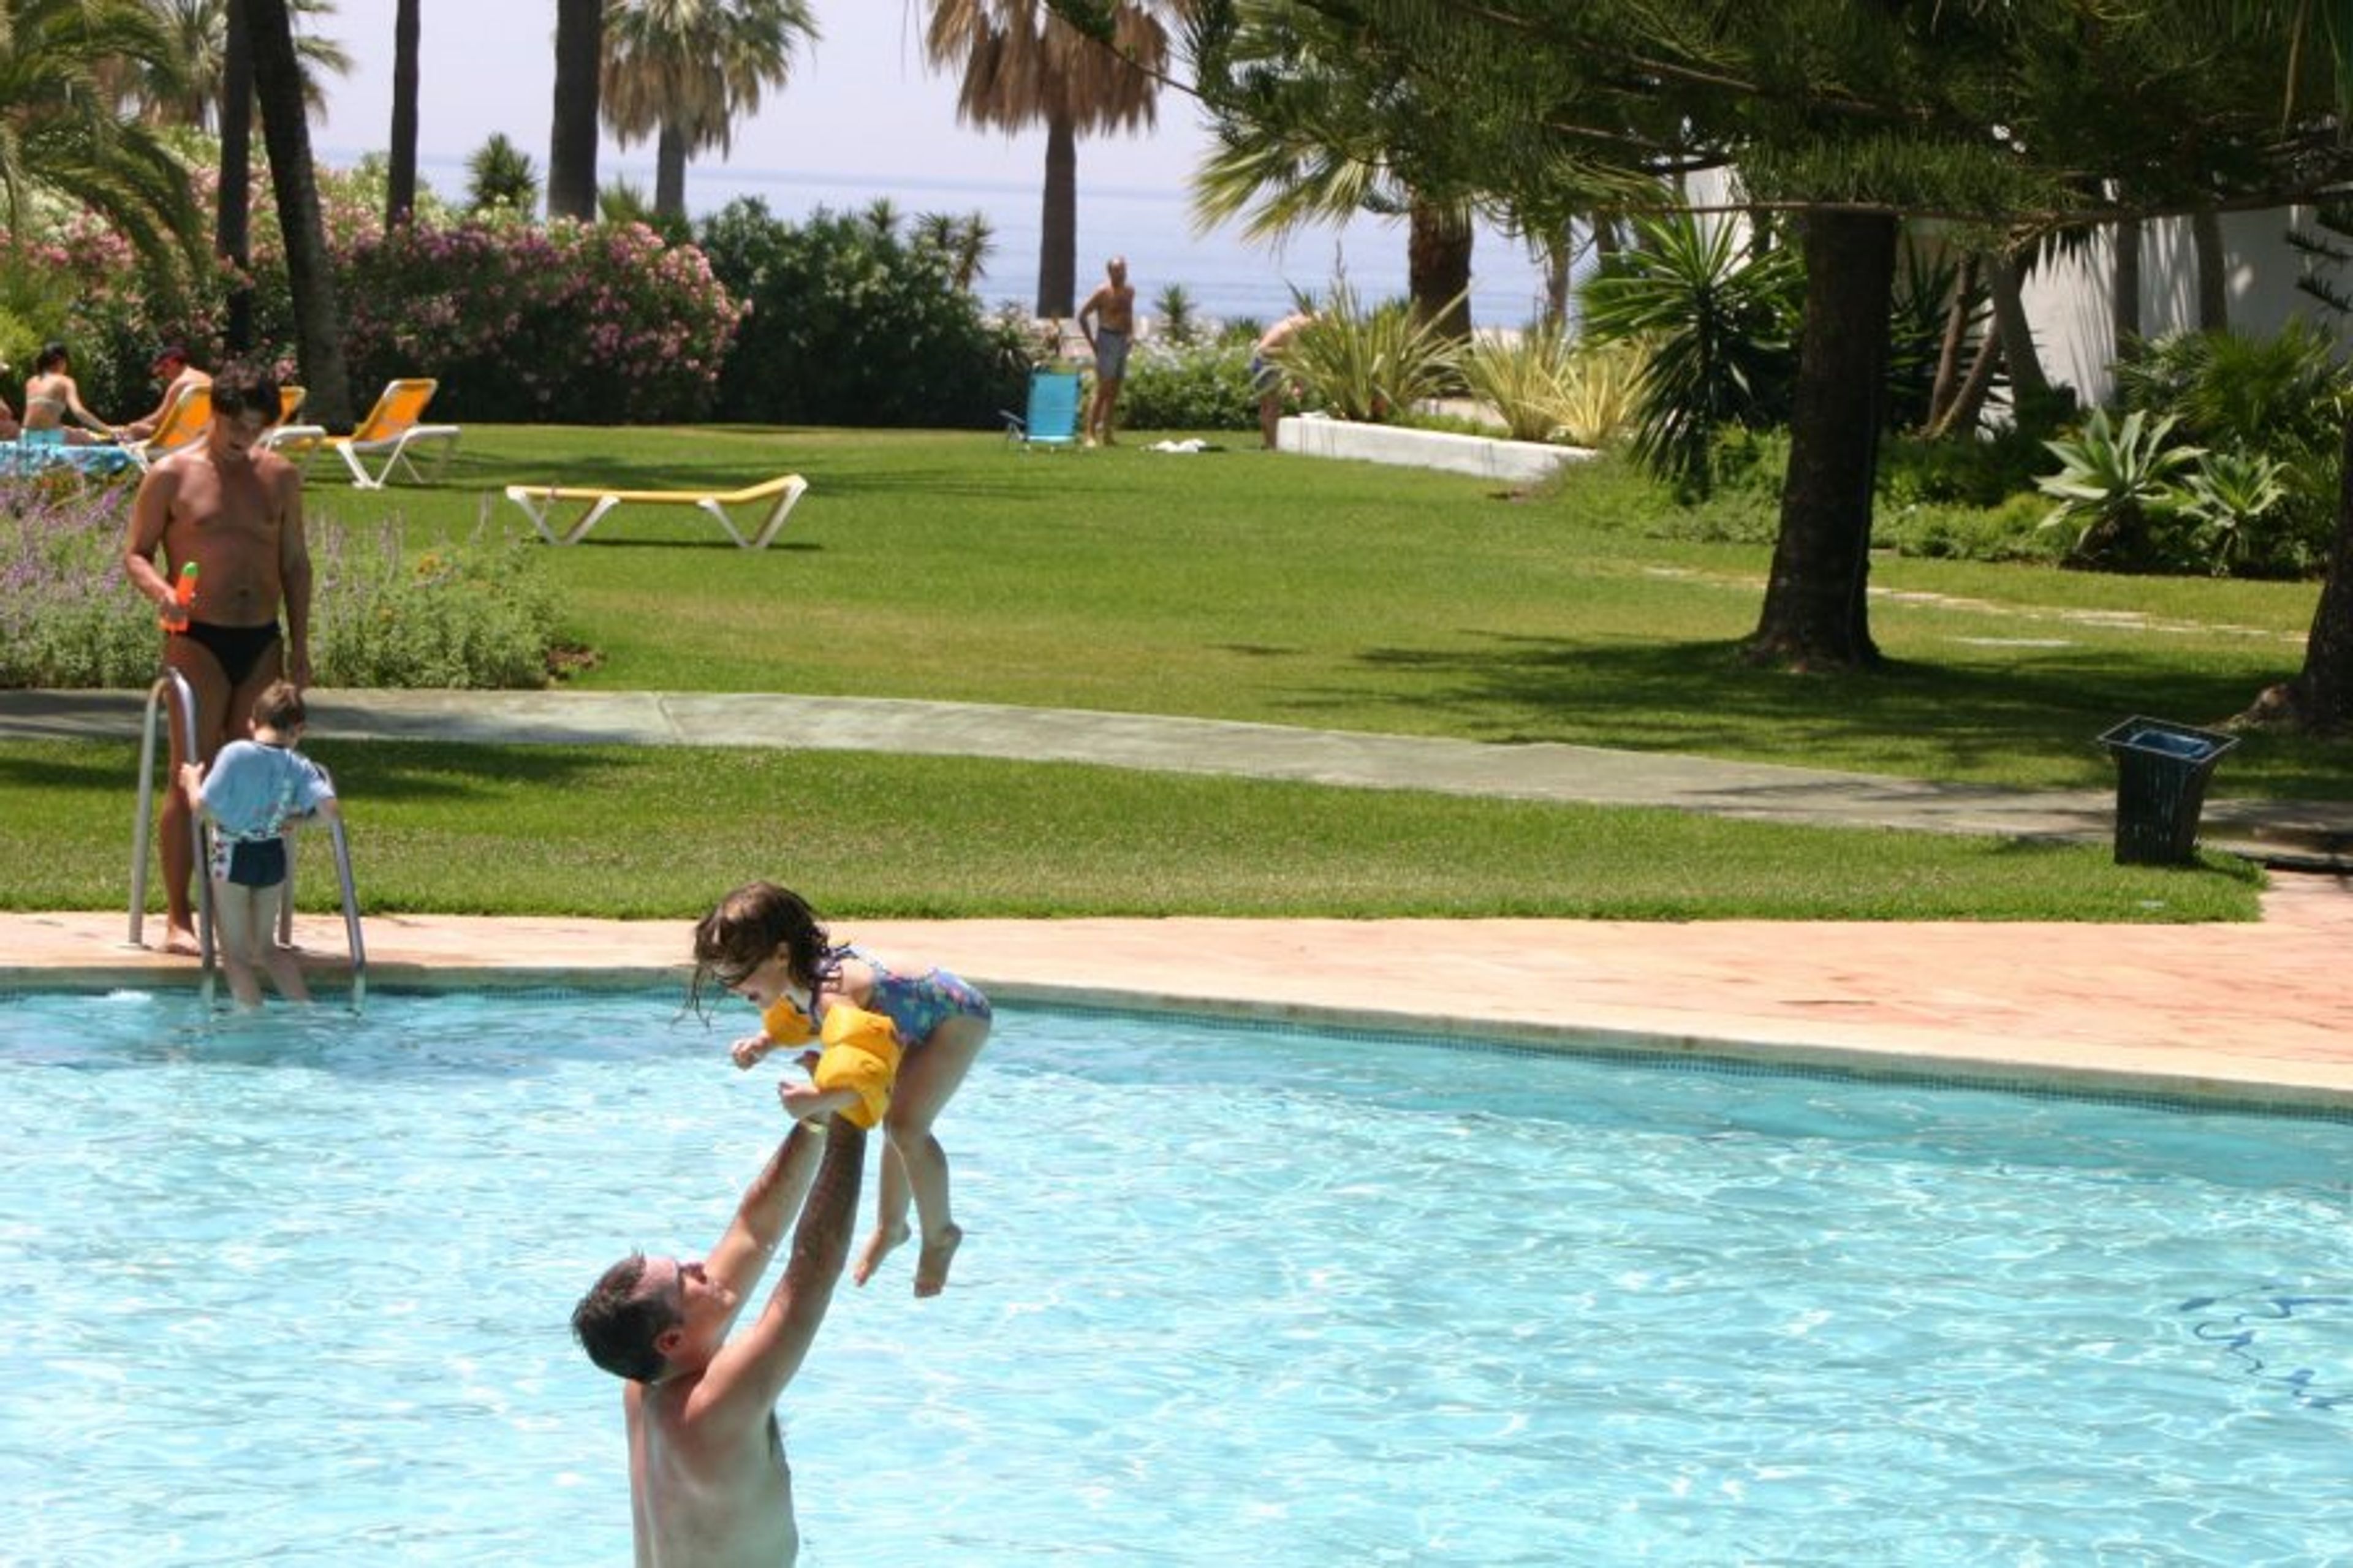 Family fun in the pool with the Mediterranean sea in the background.